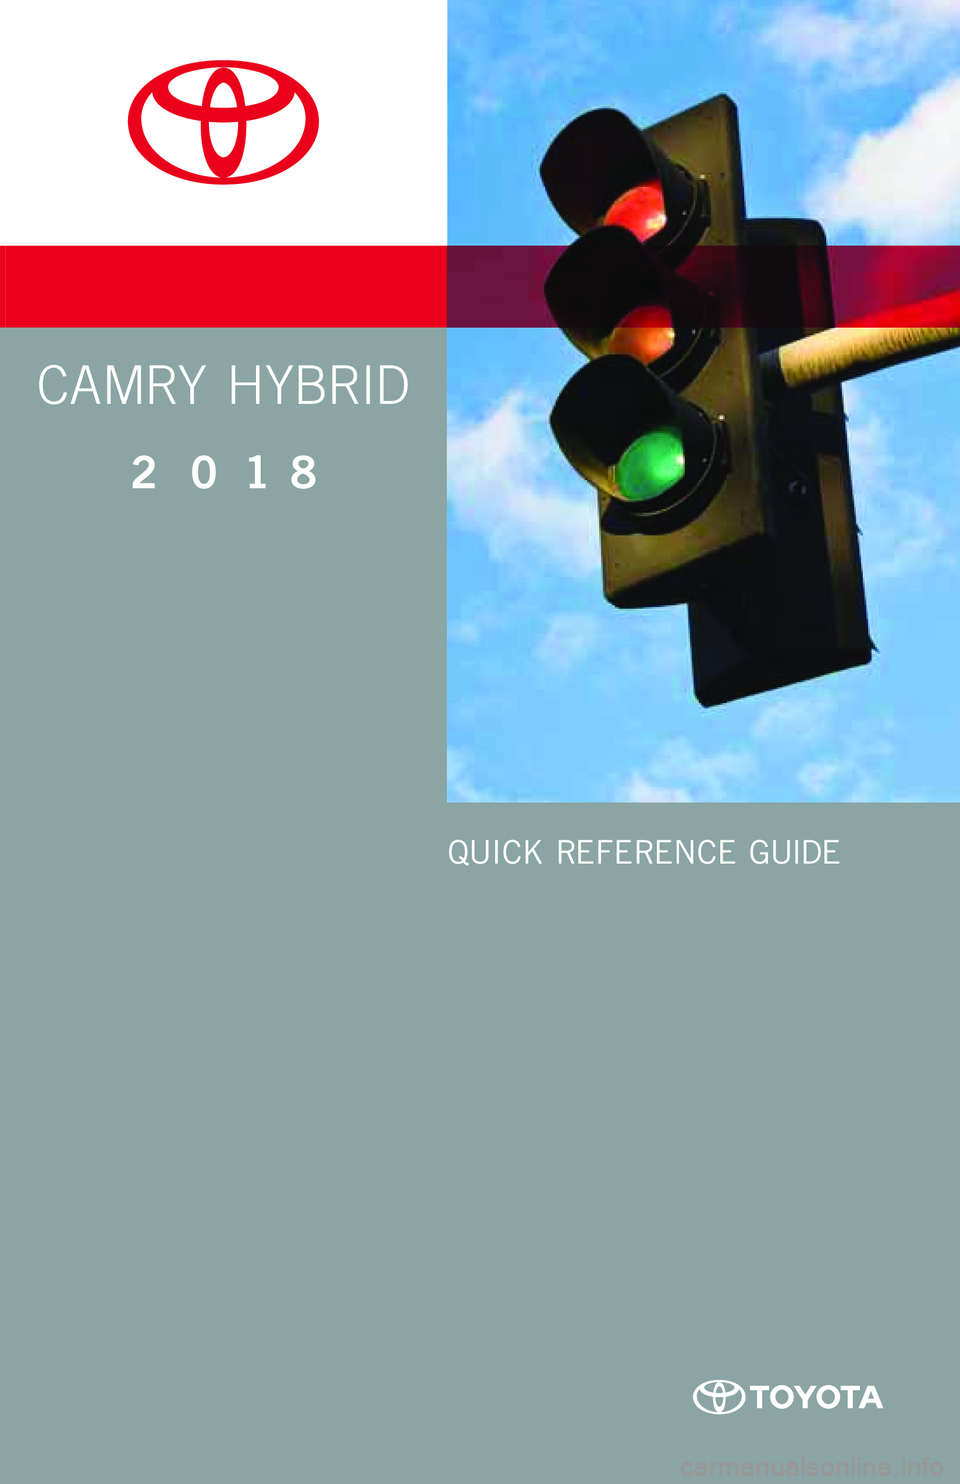 TOYOTA CAMRY HYBRID 2018  Owners Manual (in English) CAMRY HYBRID
2018
QUICK REFERENCE GUIDE 